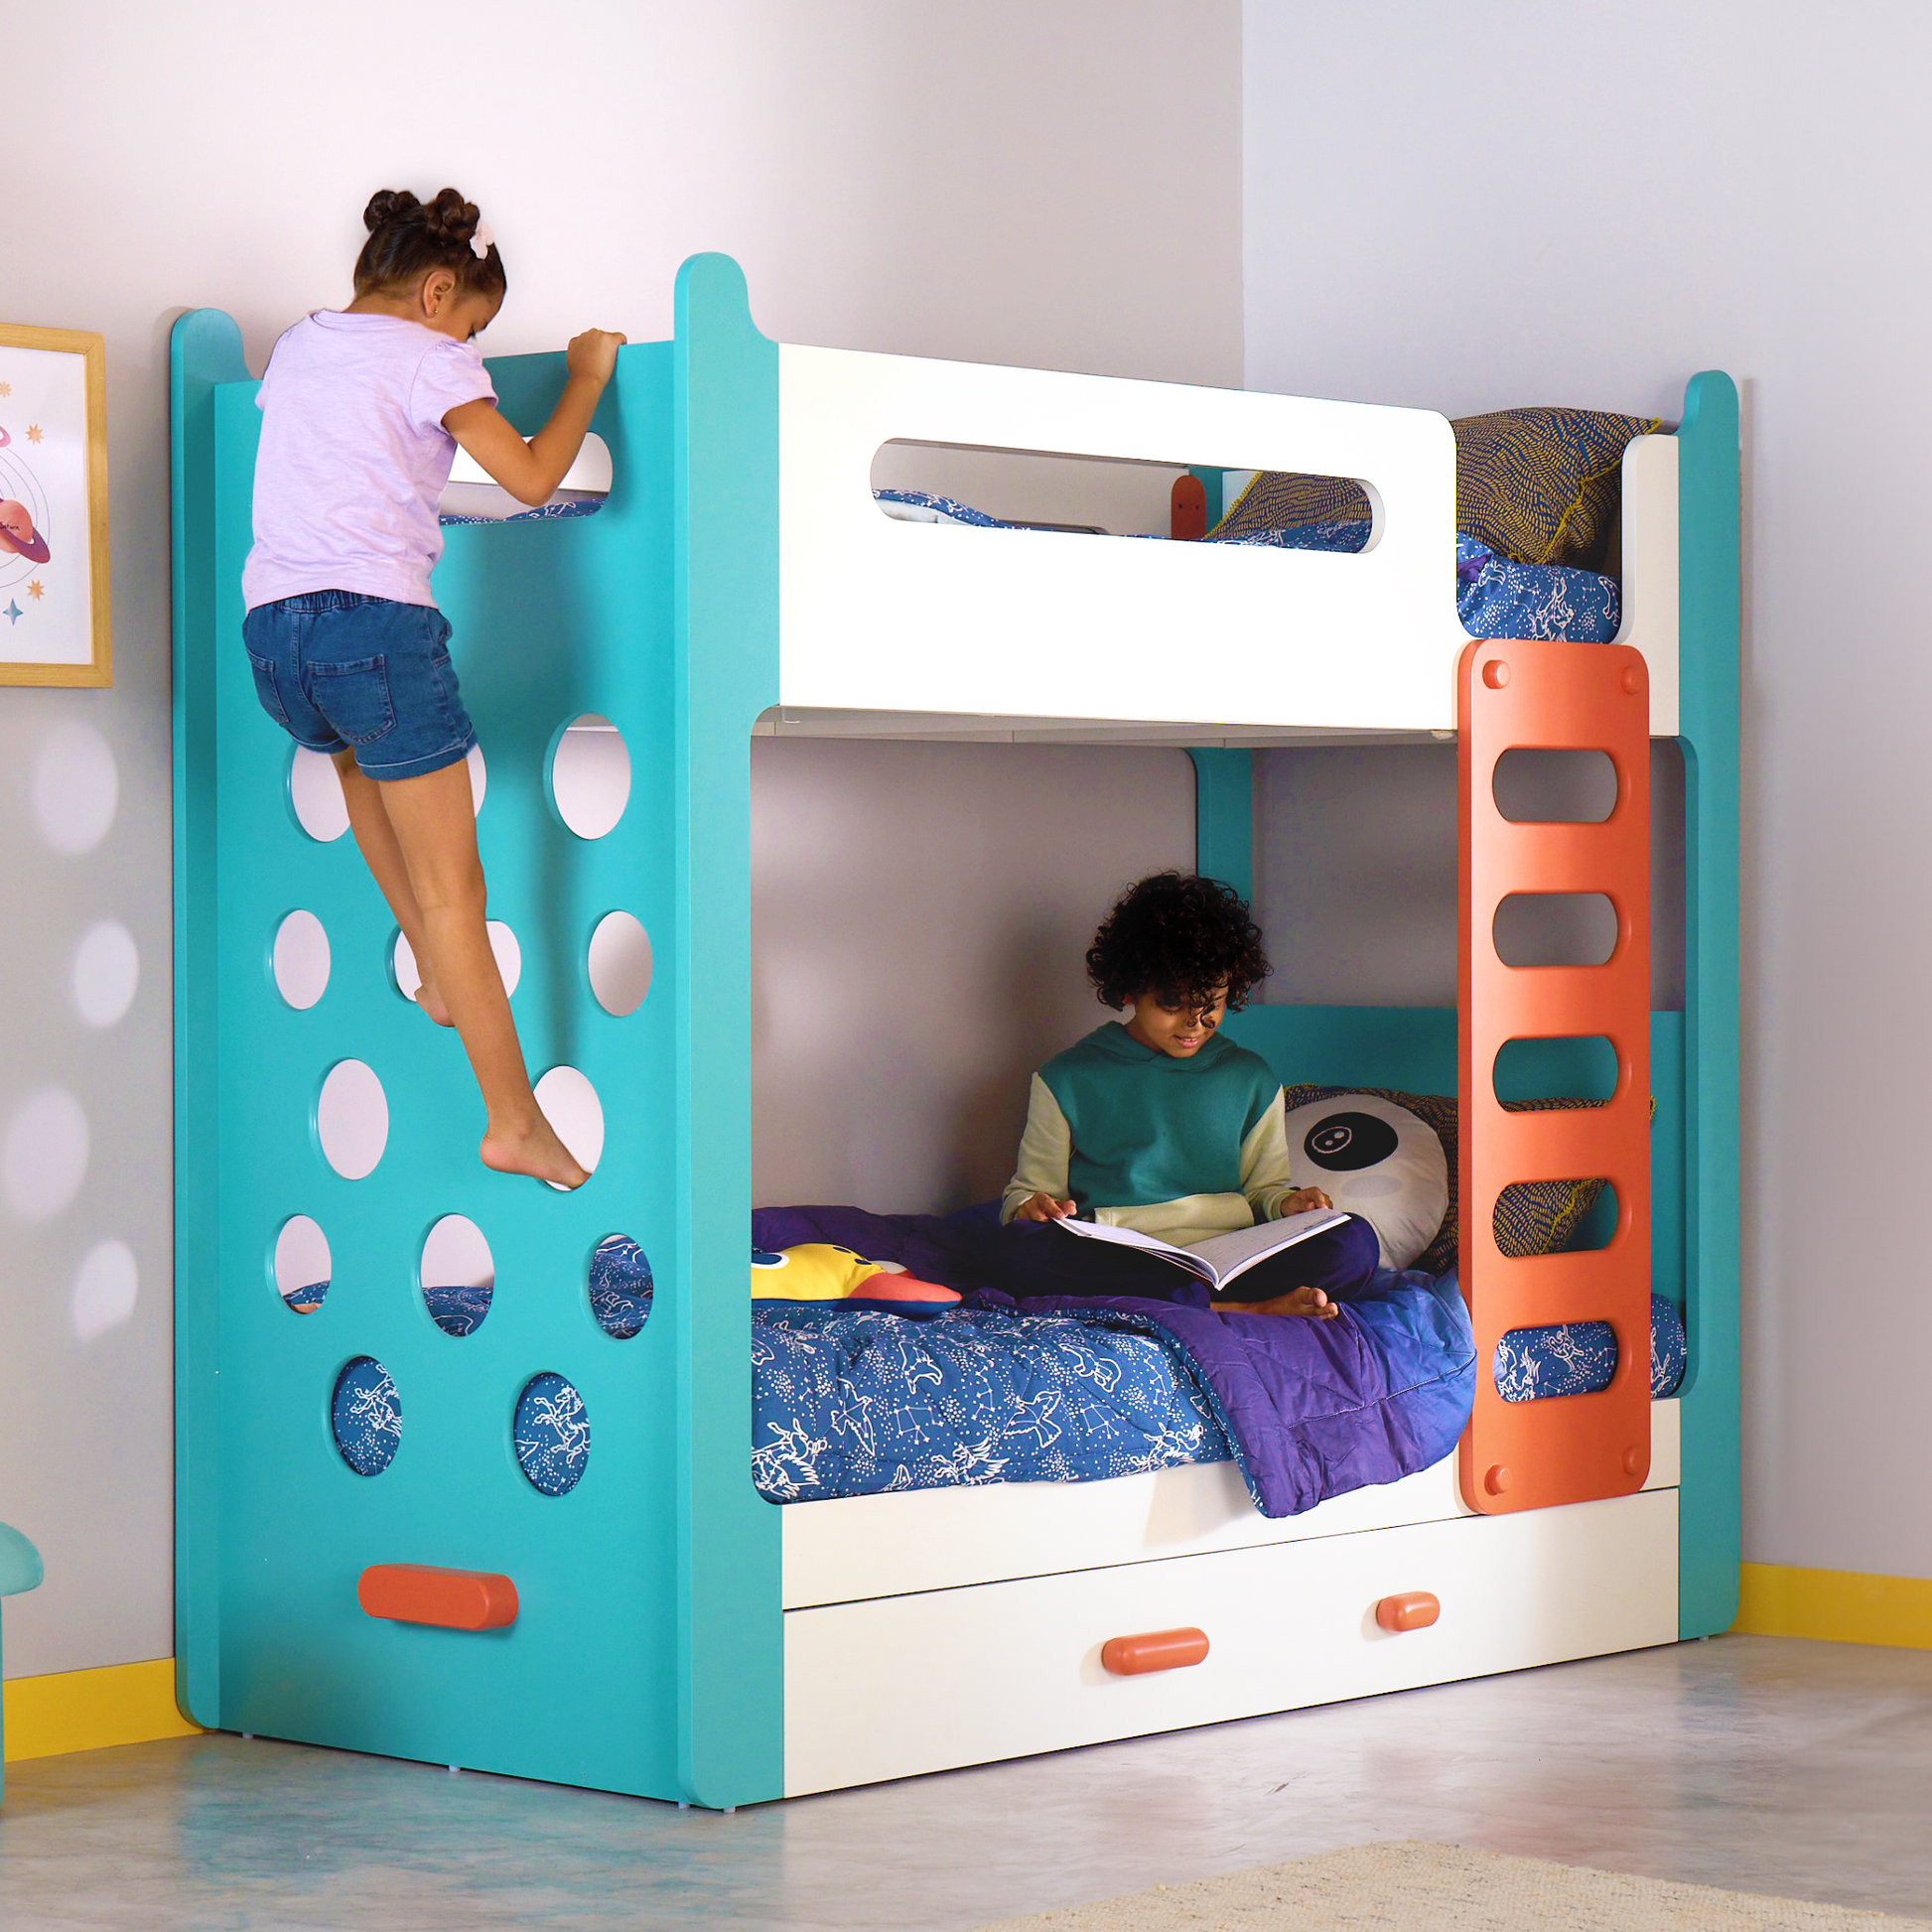 media_gallary Bunk bed with mattress 2